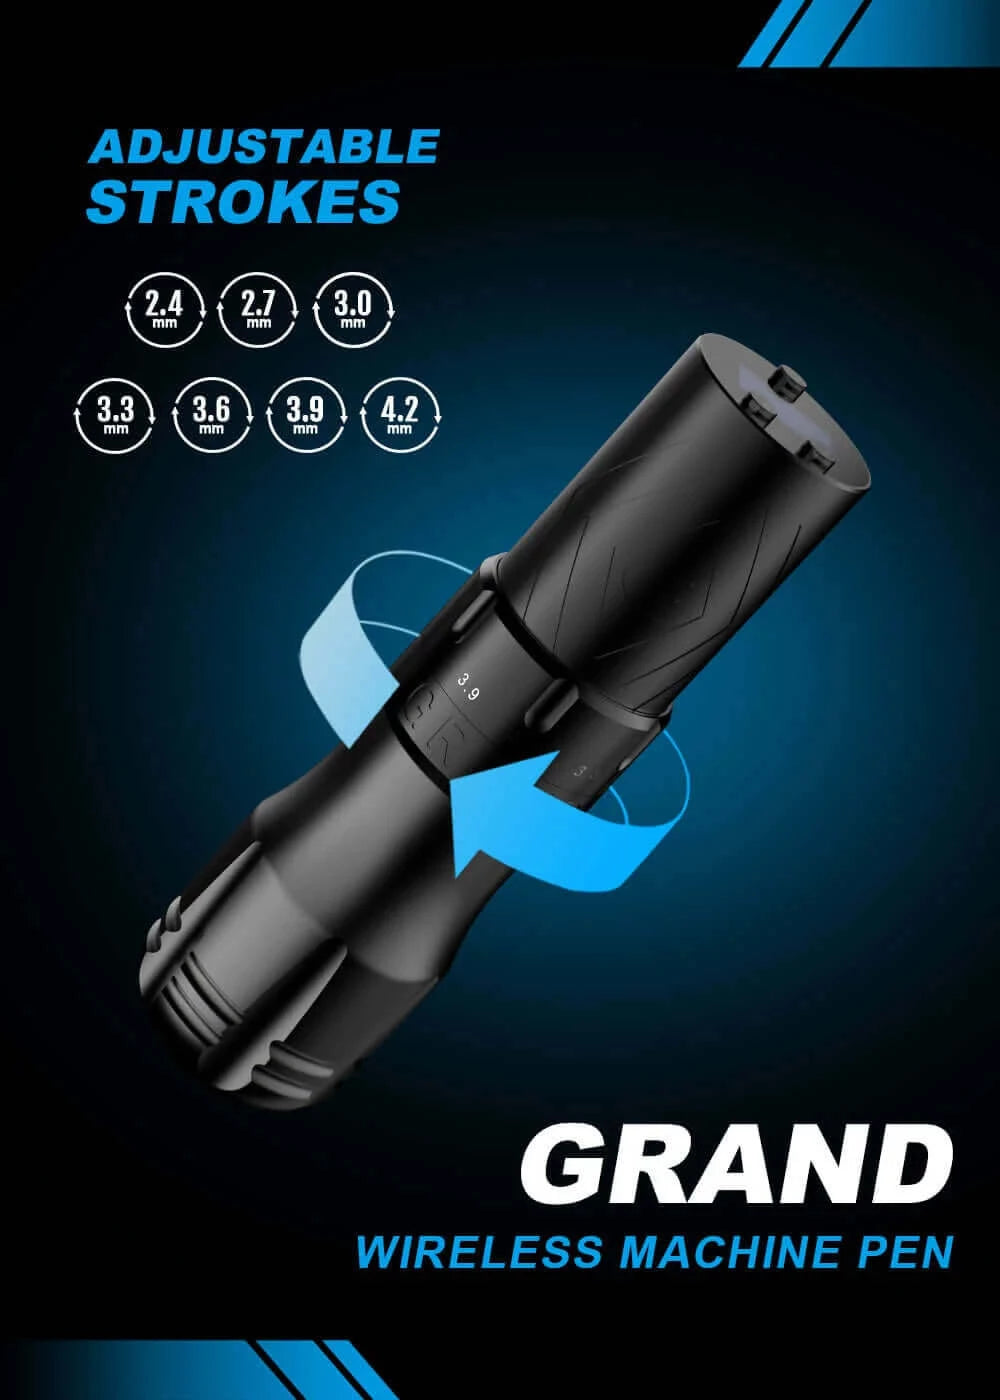 EMALLA GRAND Wireless Tattoo Pen Machine with adjustable strokes from 2.4mm to 4.2mm